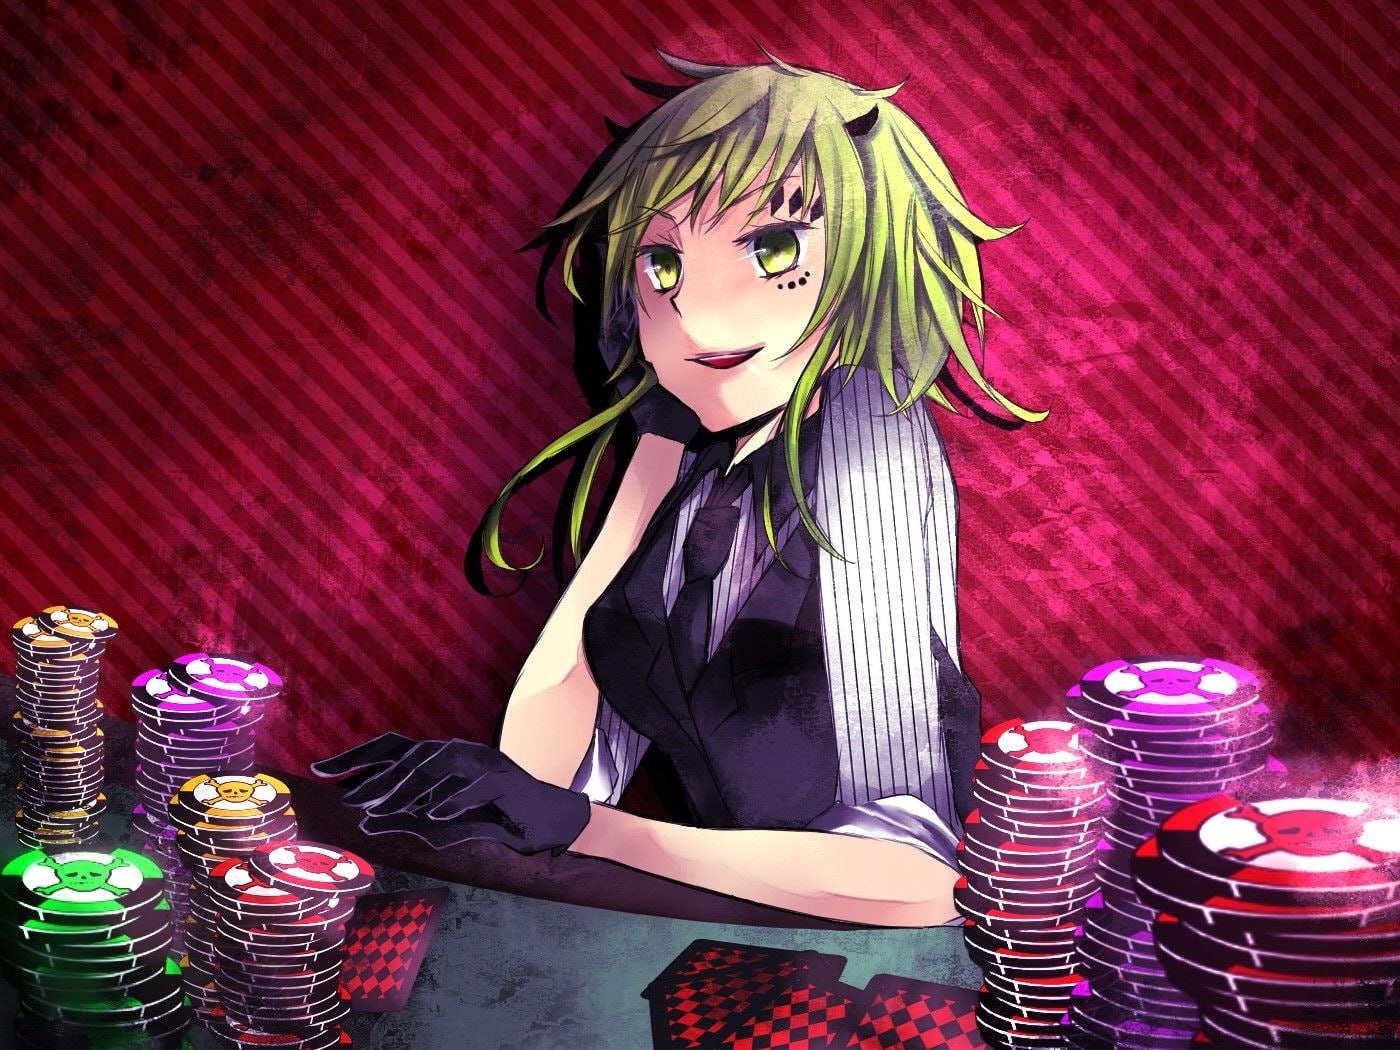 Vocaloid, Megpoid Gumi, poker, candle, one person, table, indoors